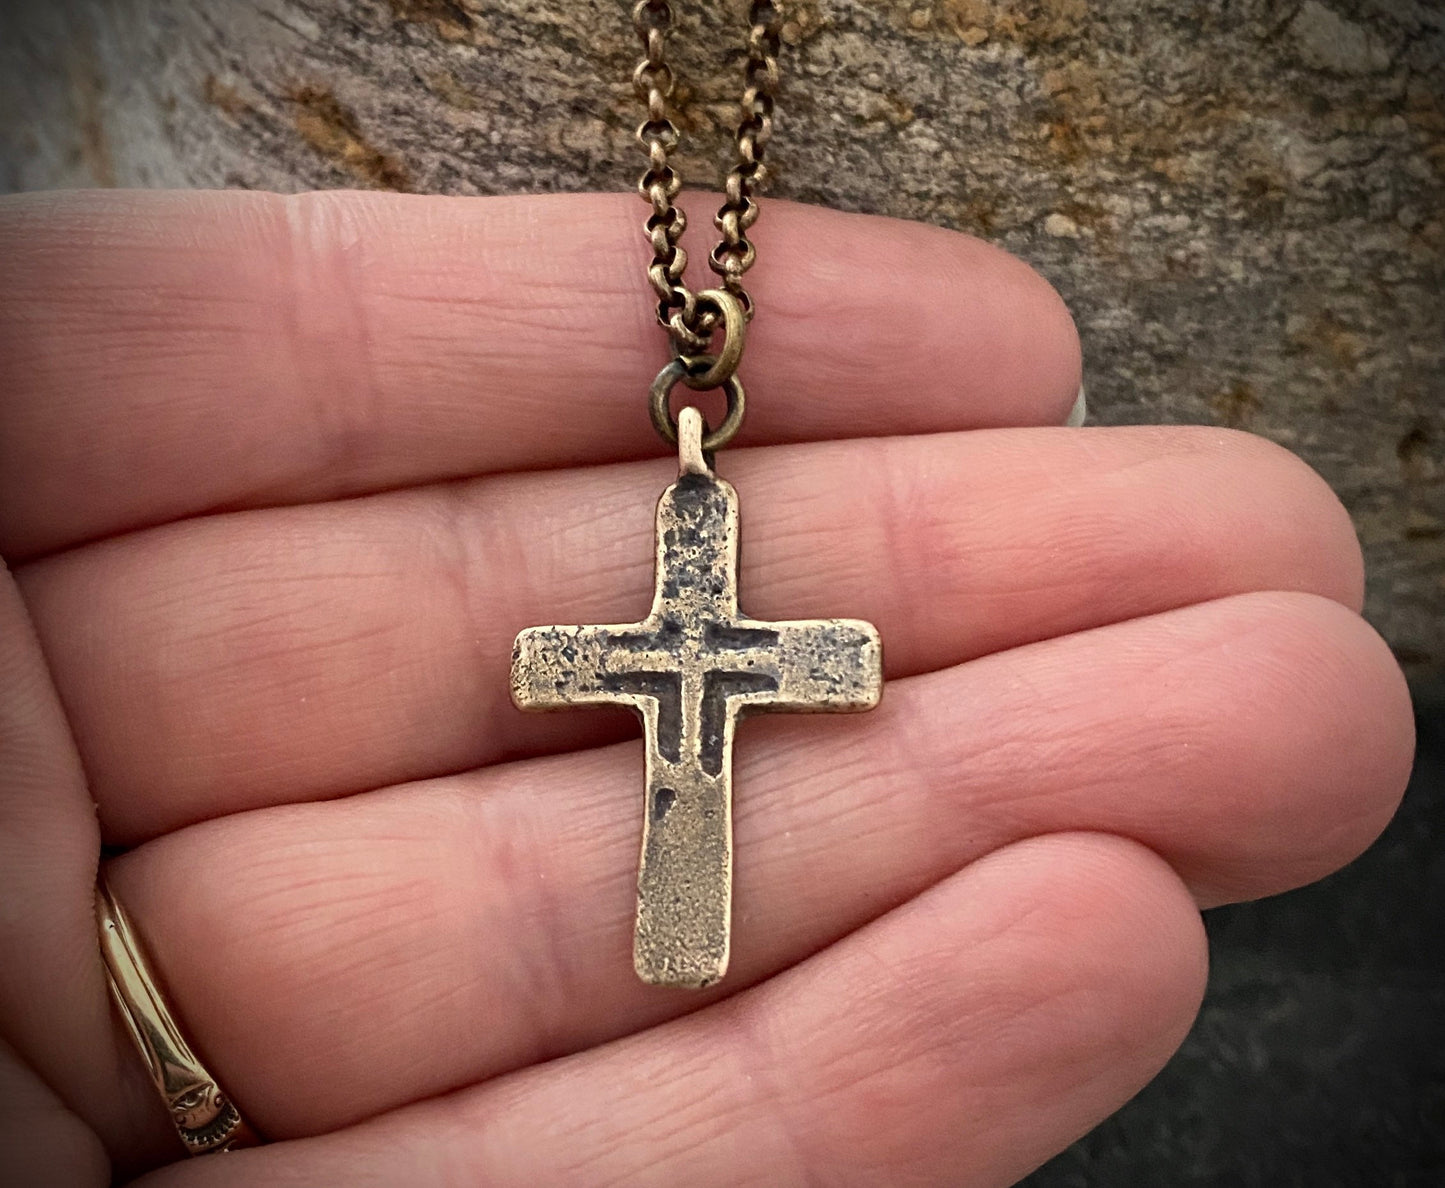 Johnny LTD Original Piece - Brass Men's Necklace with Bronze Cross made from Ancient Medieval Original, 20 or 24 inches, BR-004